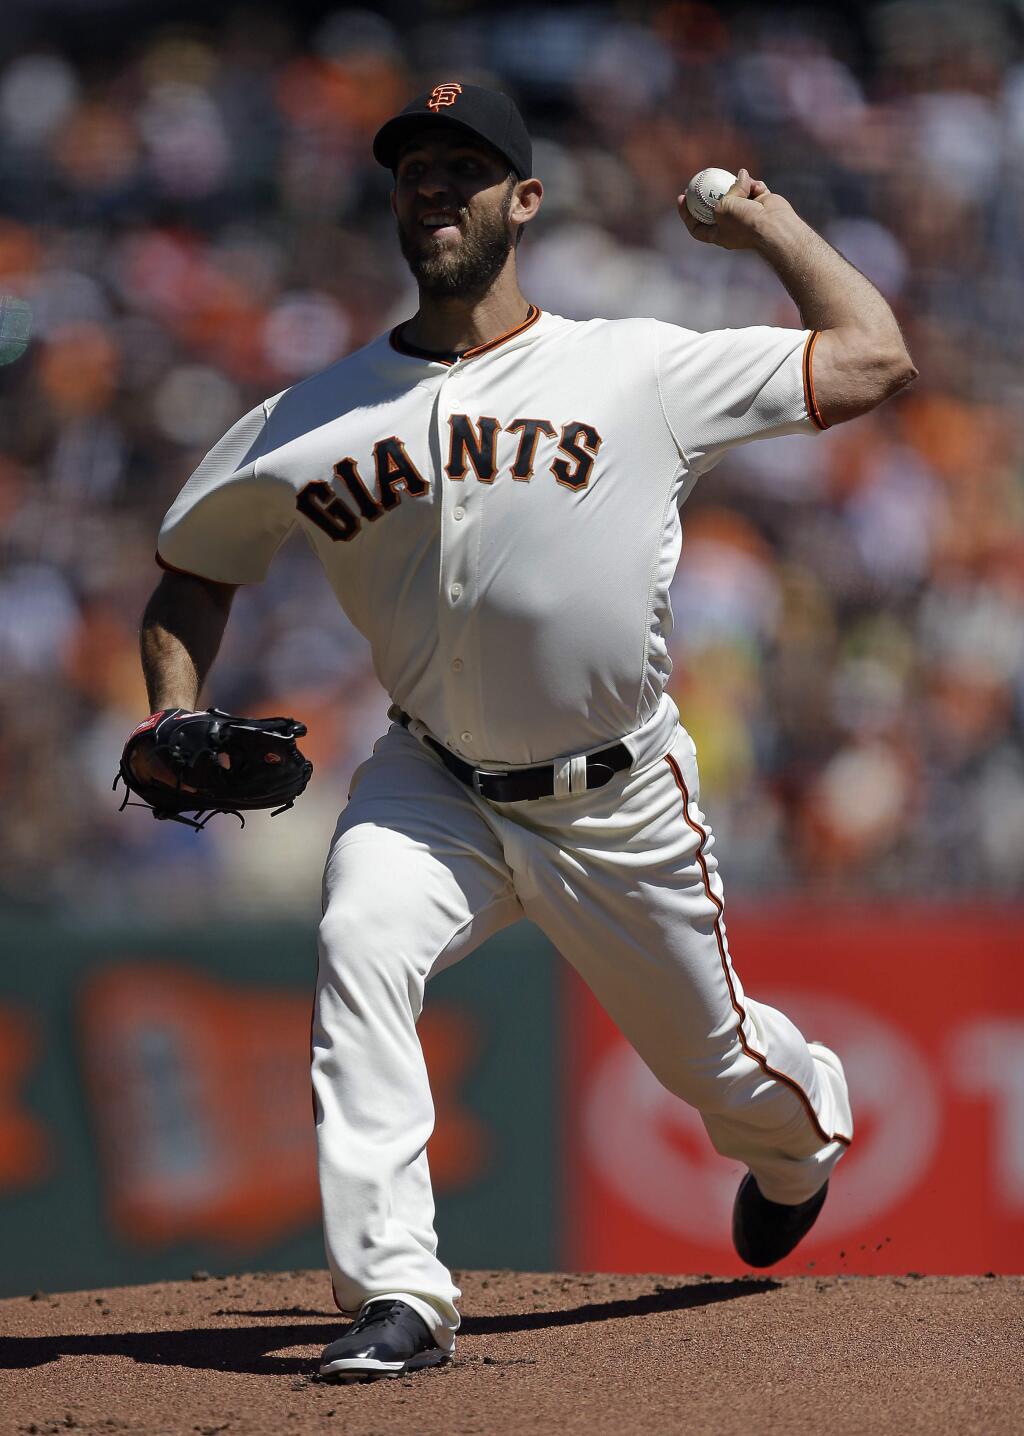 San Francisco Giants pitcher Madison Bumgarner works against the Atlanta Braves in the first inning of a baseball game Sunday, Aug. 28, 2016, in San Francisco. (AP Photo/Ben Margot)